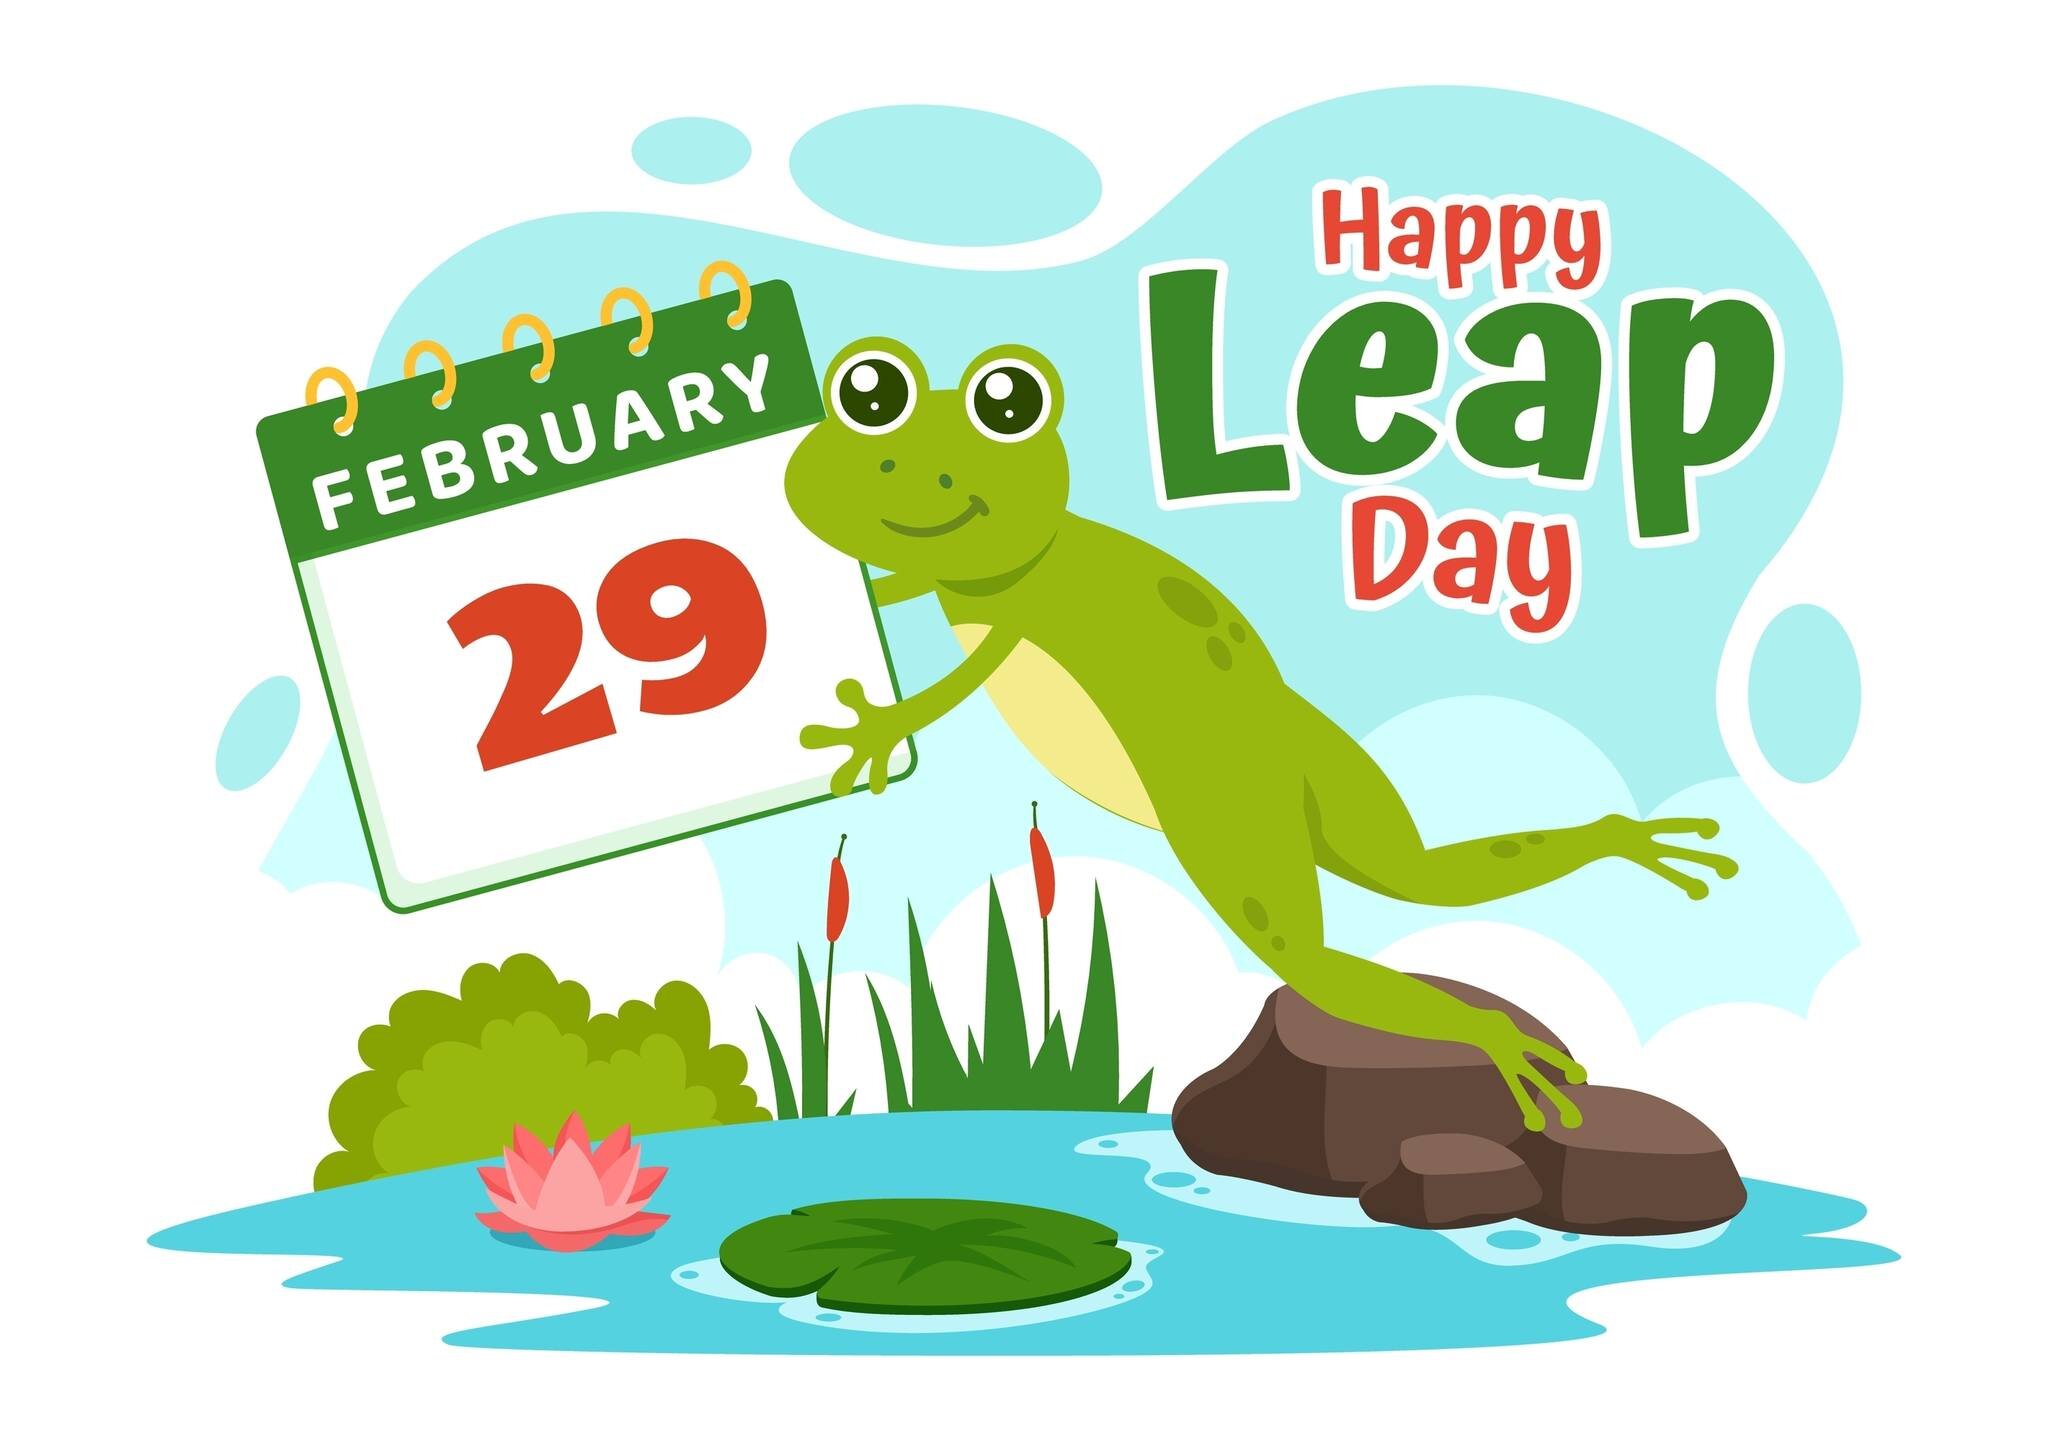 The origins of the #leapyear can be traced back to the Egyptian Empire, who created a 365-day calendar to mimic the Solar Calendar. Around 3,000 years later, Julius Caesar, the Roman Emperor, recognized the existence of winter and created a 12 month 